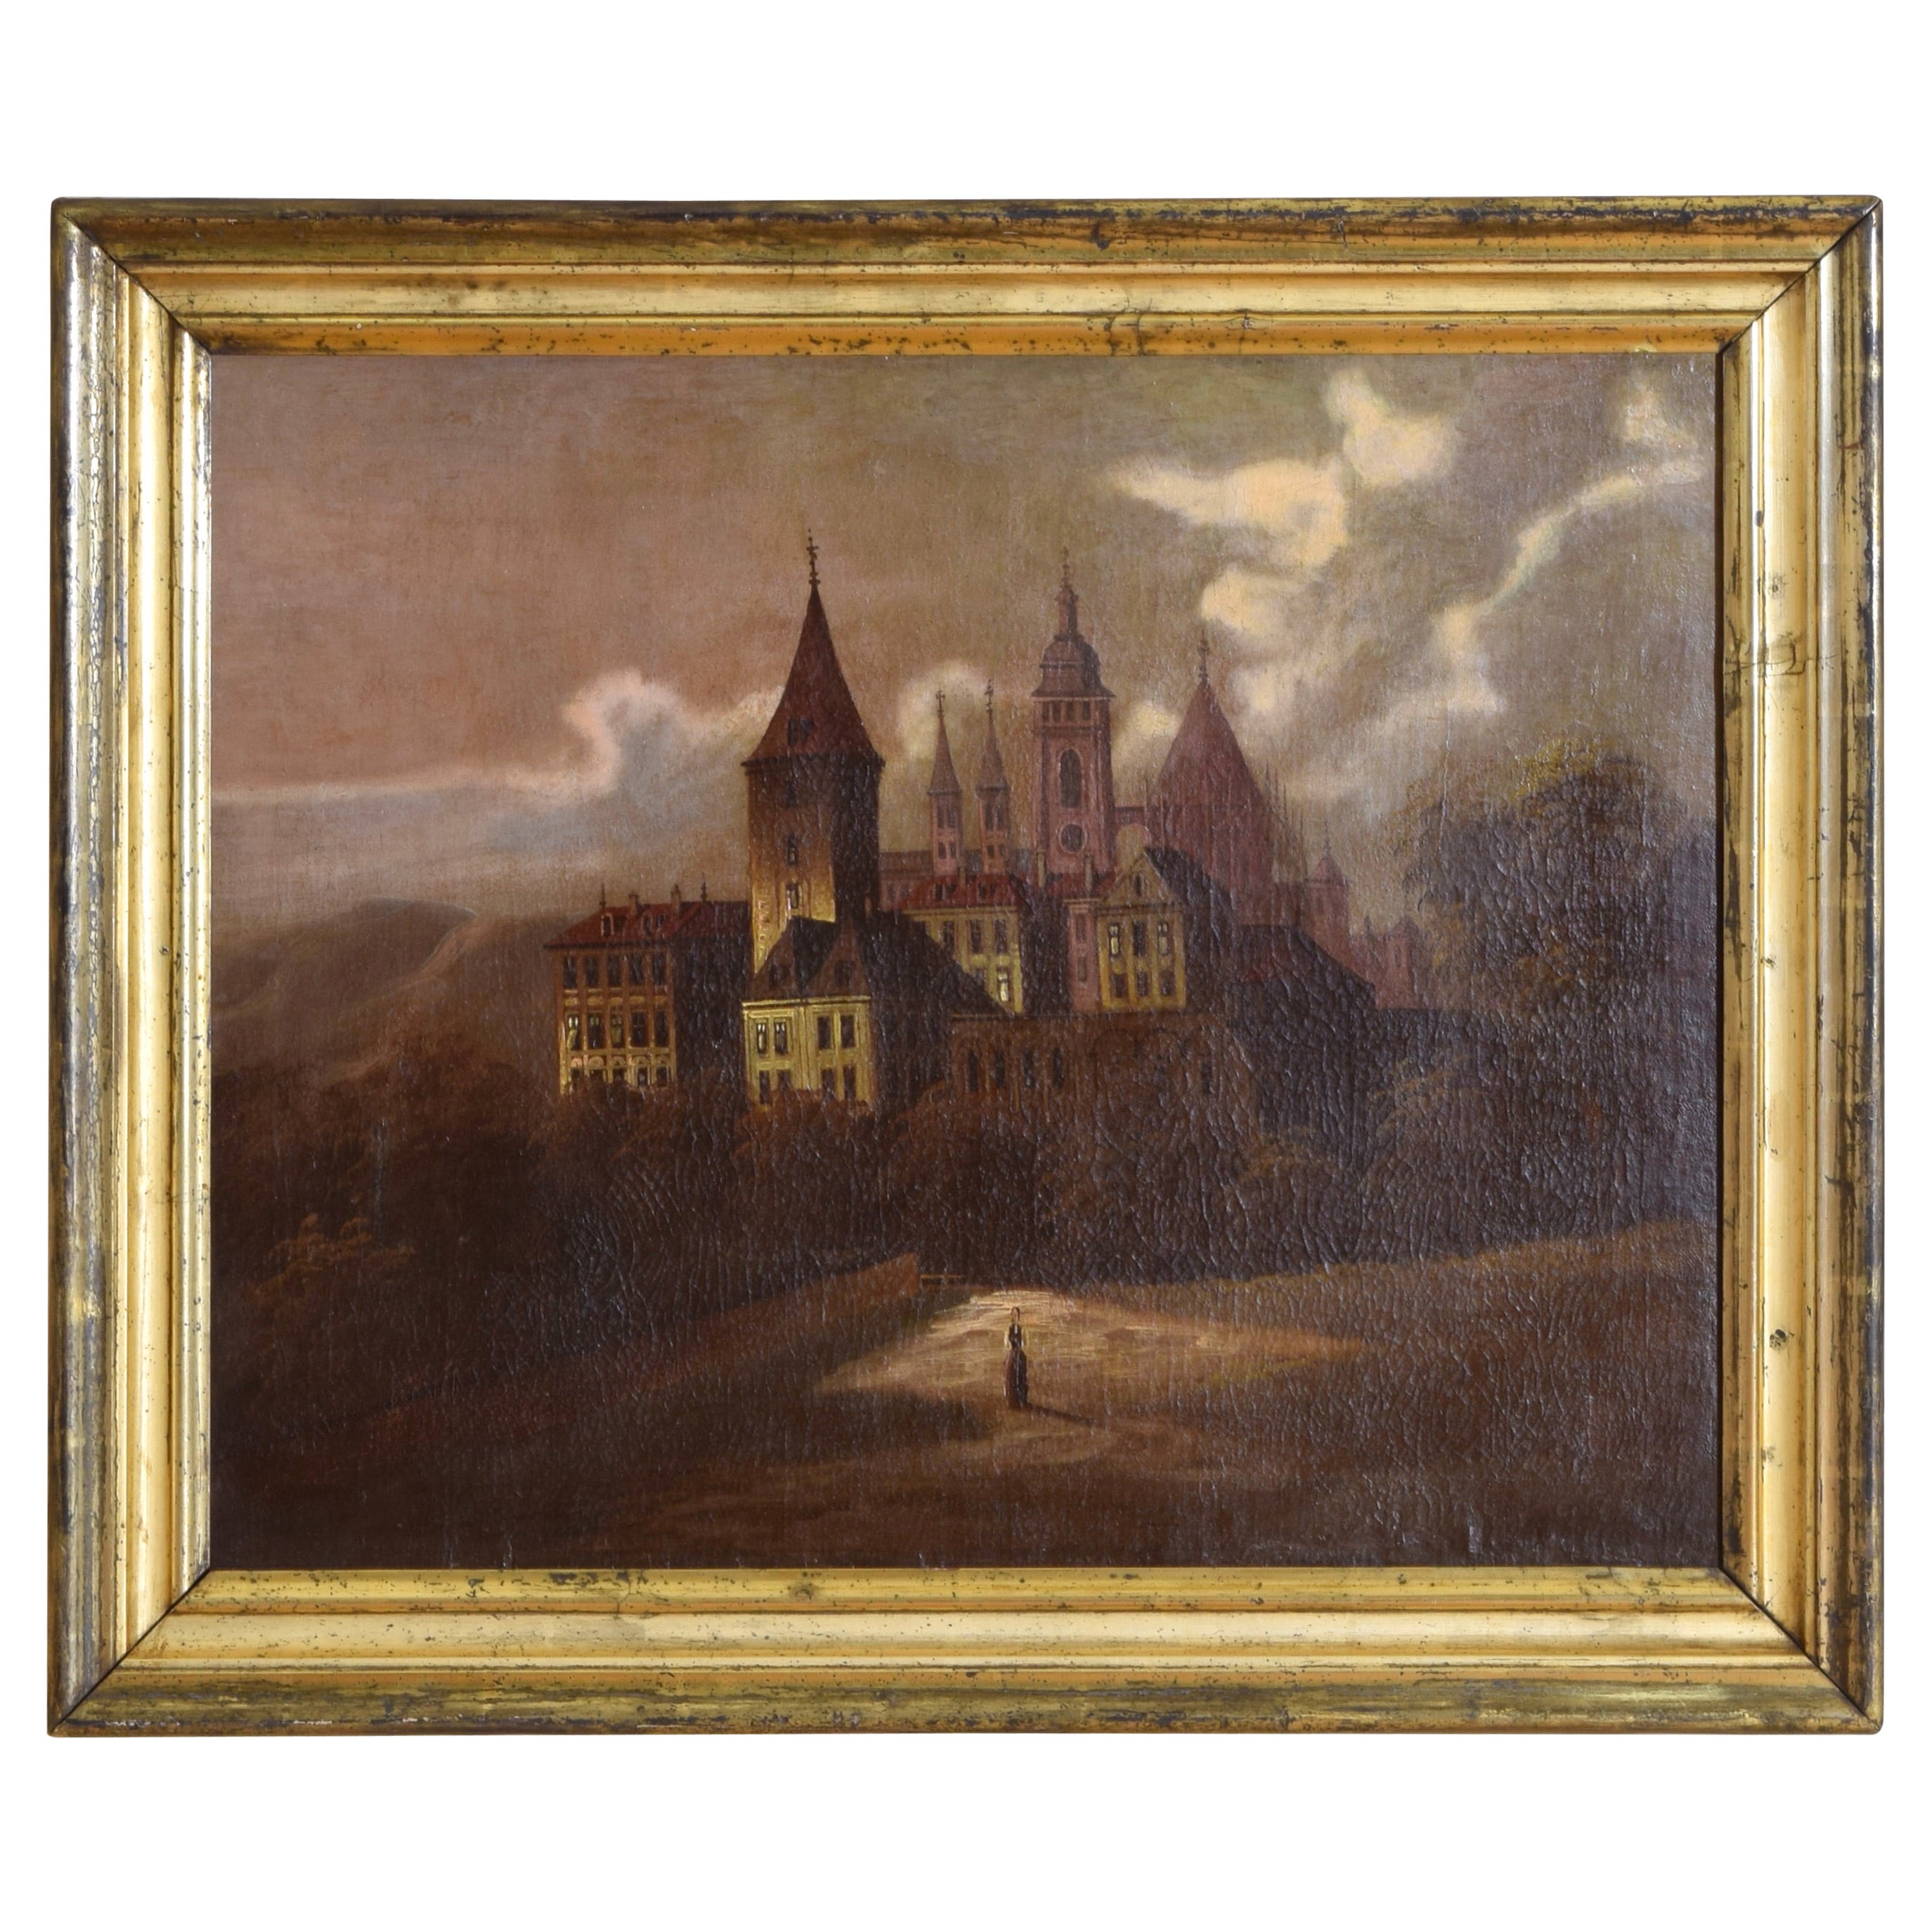 French Oil on Canvas, Village and Lone Figure, in period Giltwood Frame, ca.1835